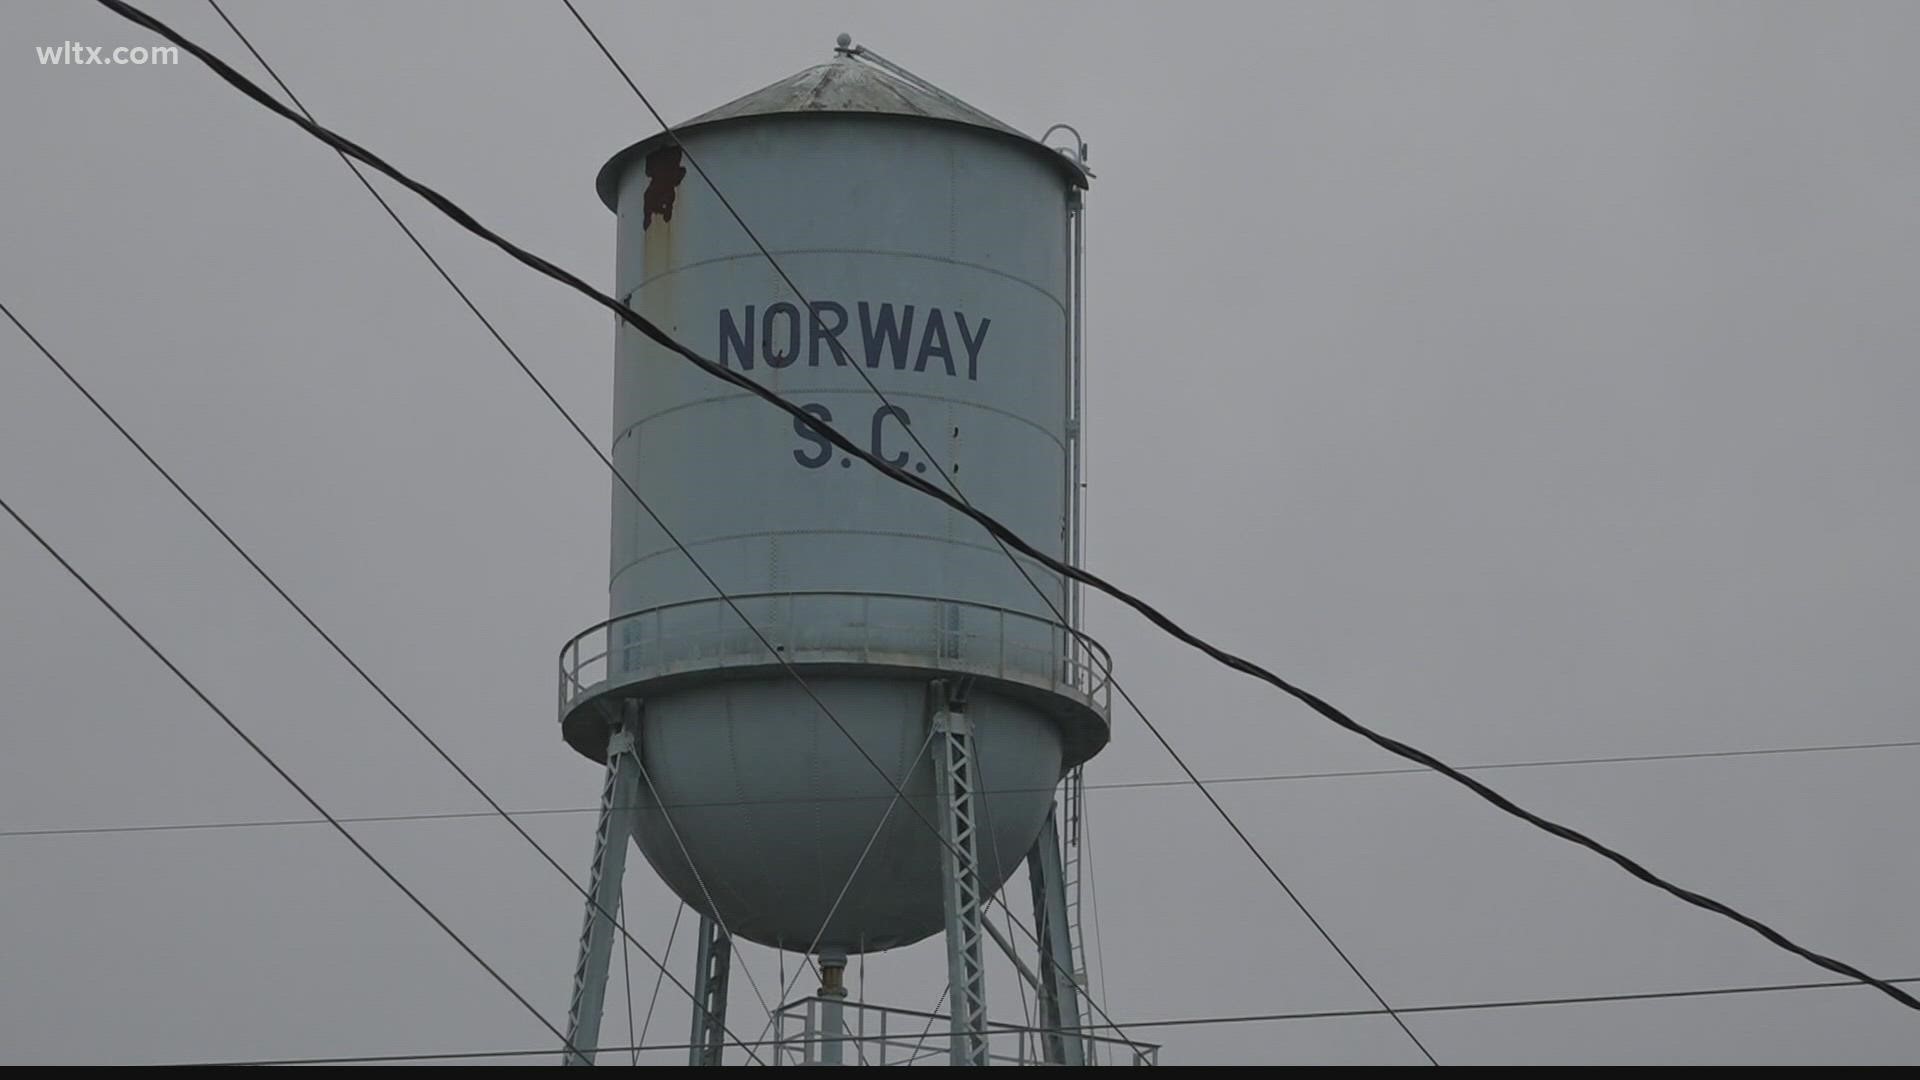 In July, the Orangeburg County town of Norway will increase their water rates.